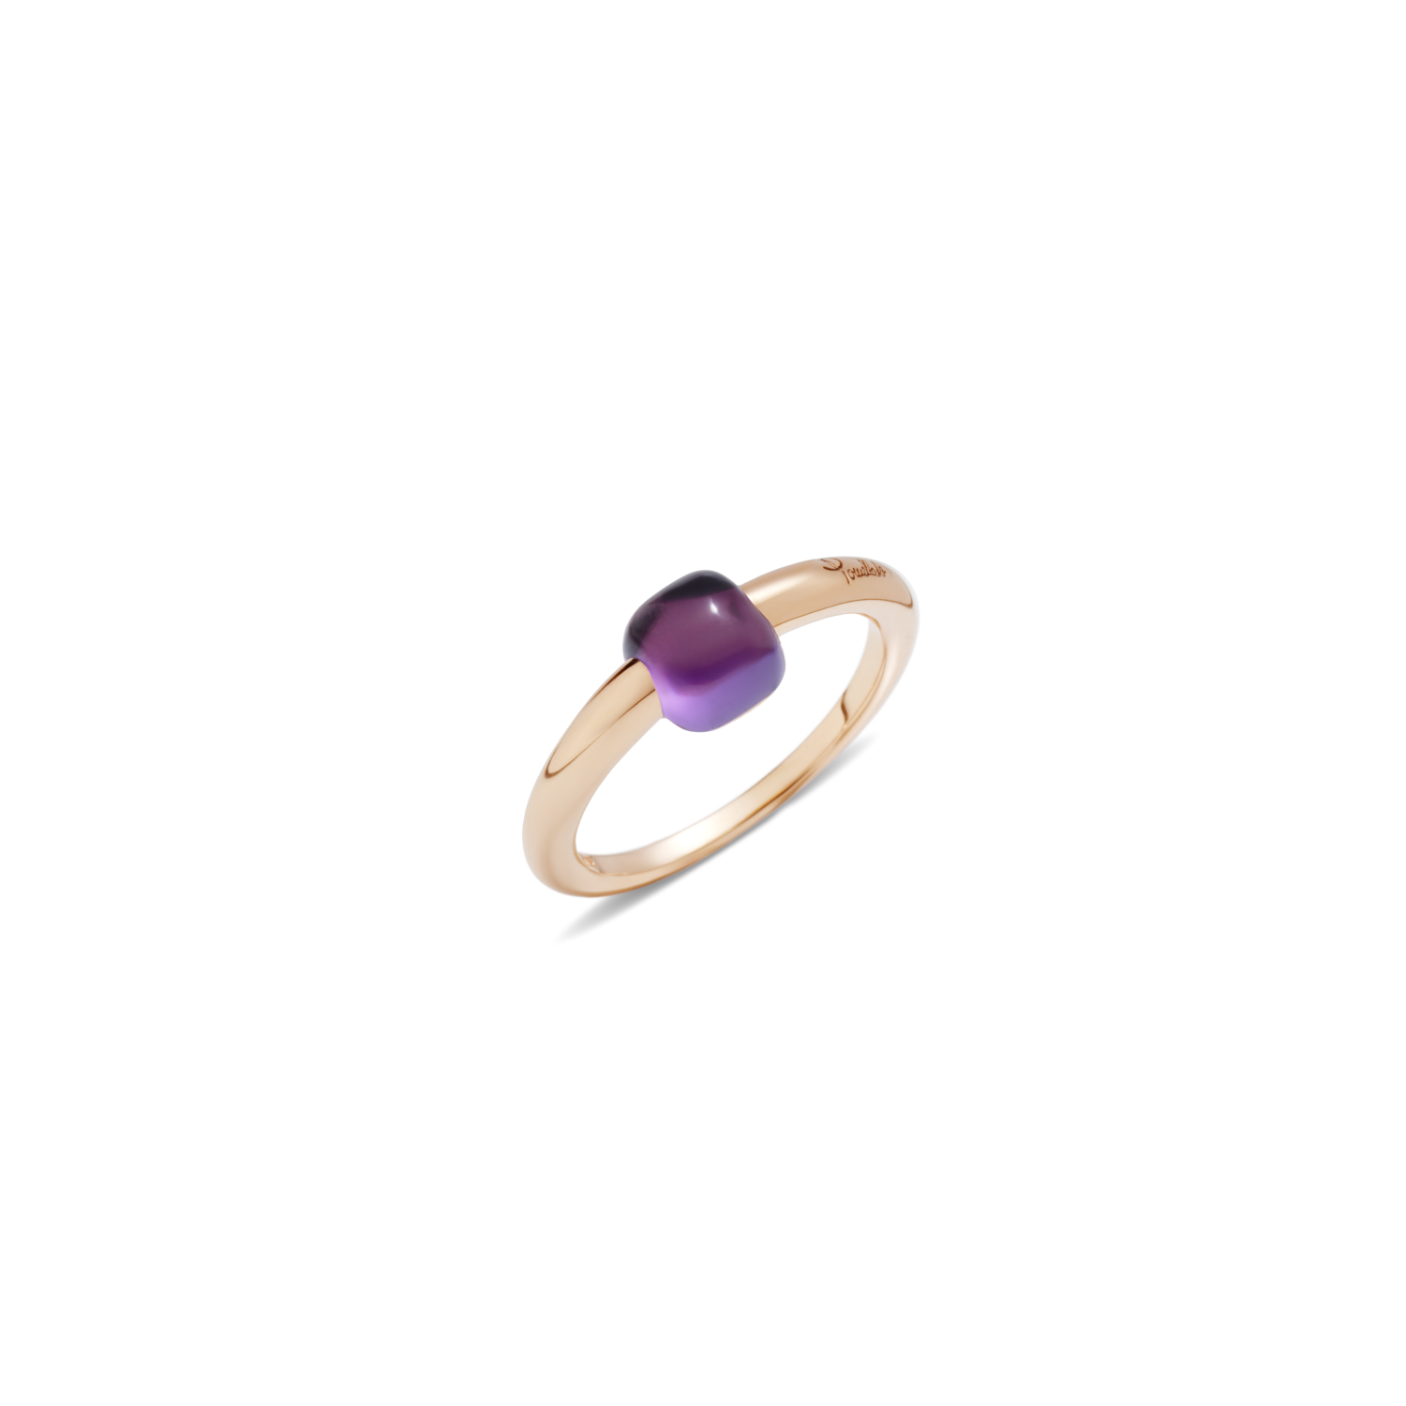 PAB0041_O7000_000OI_010_Pomellato_ring-m'ama-non-m'ama-rose-gold-18kt-amethyst.png